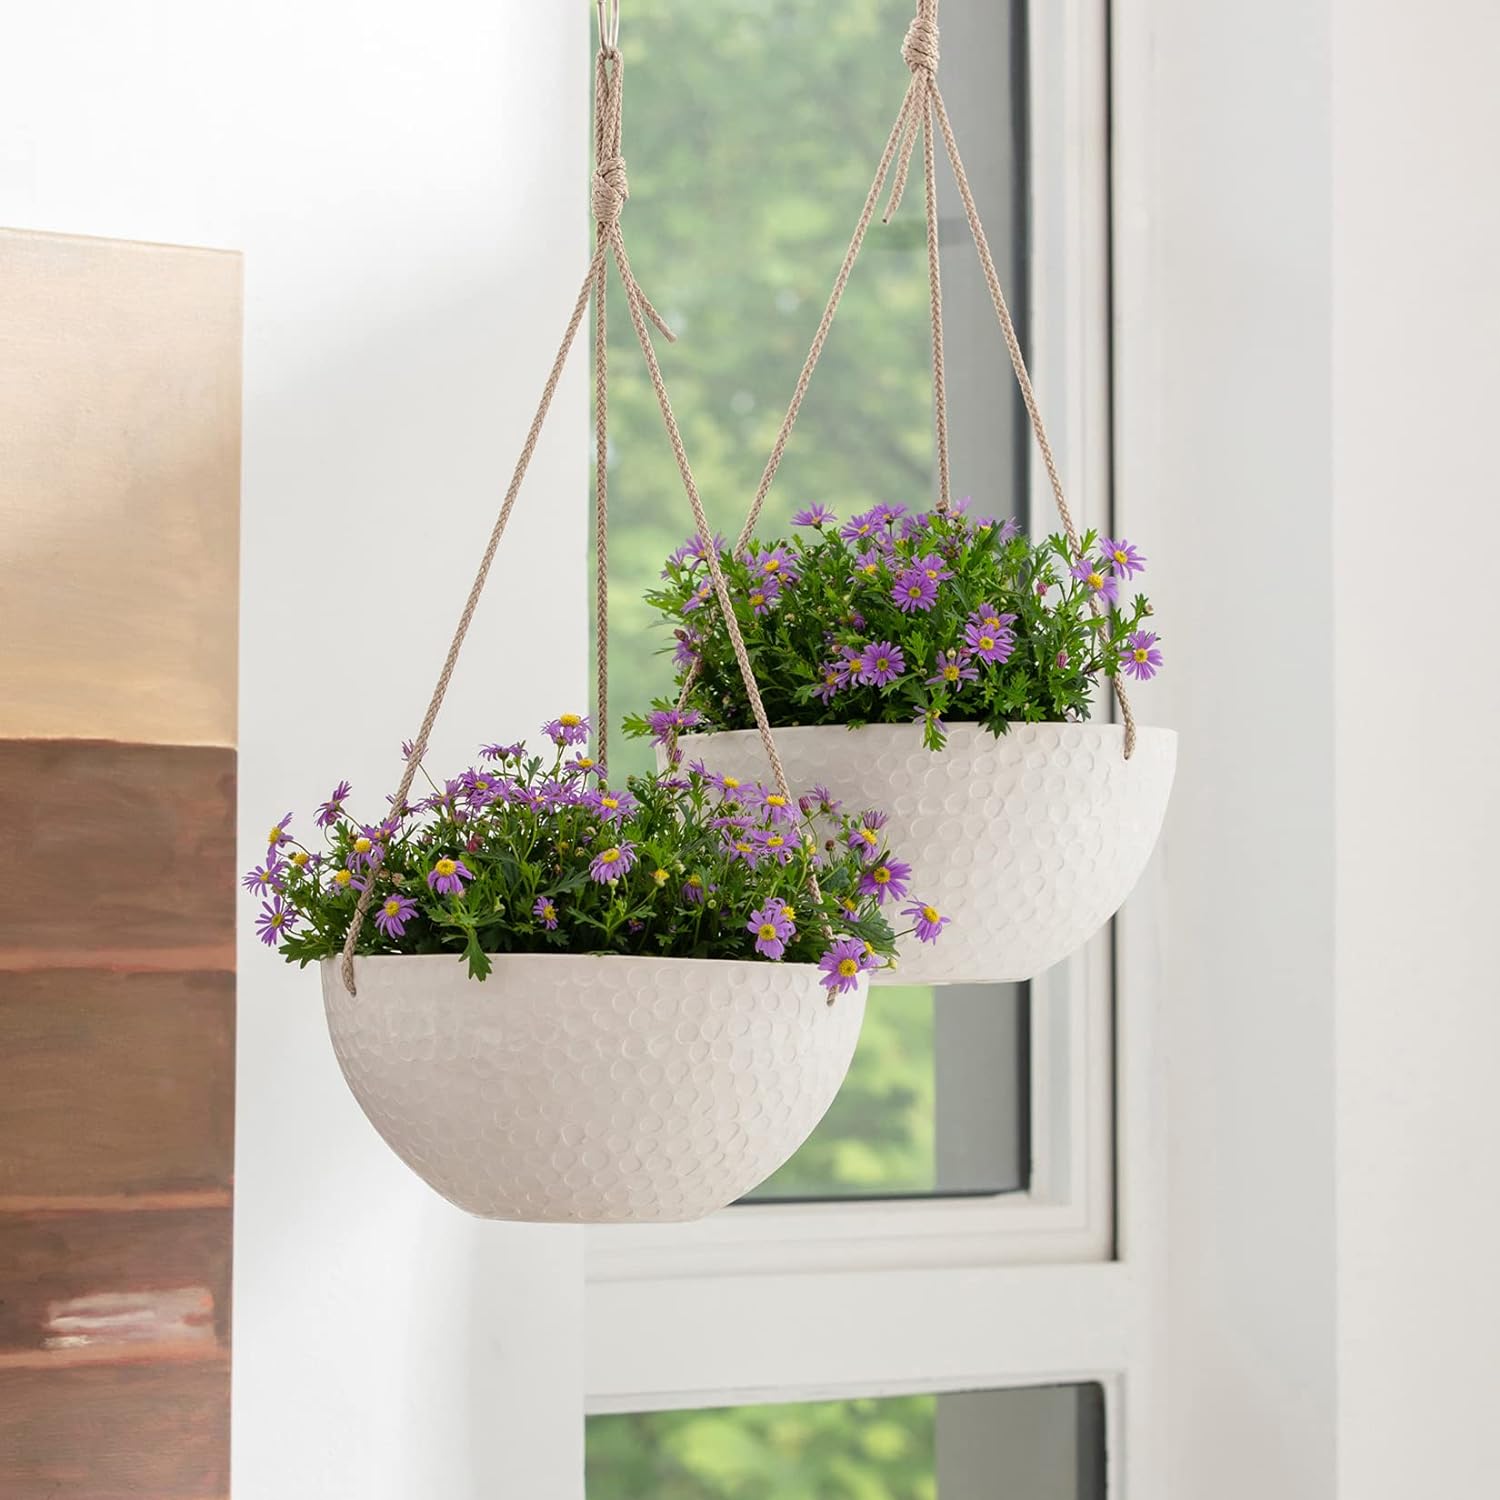 Elevate Your Space with Our Set of 2 White Hanging Planter Baskets